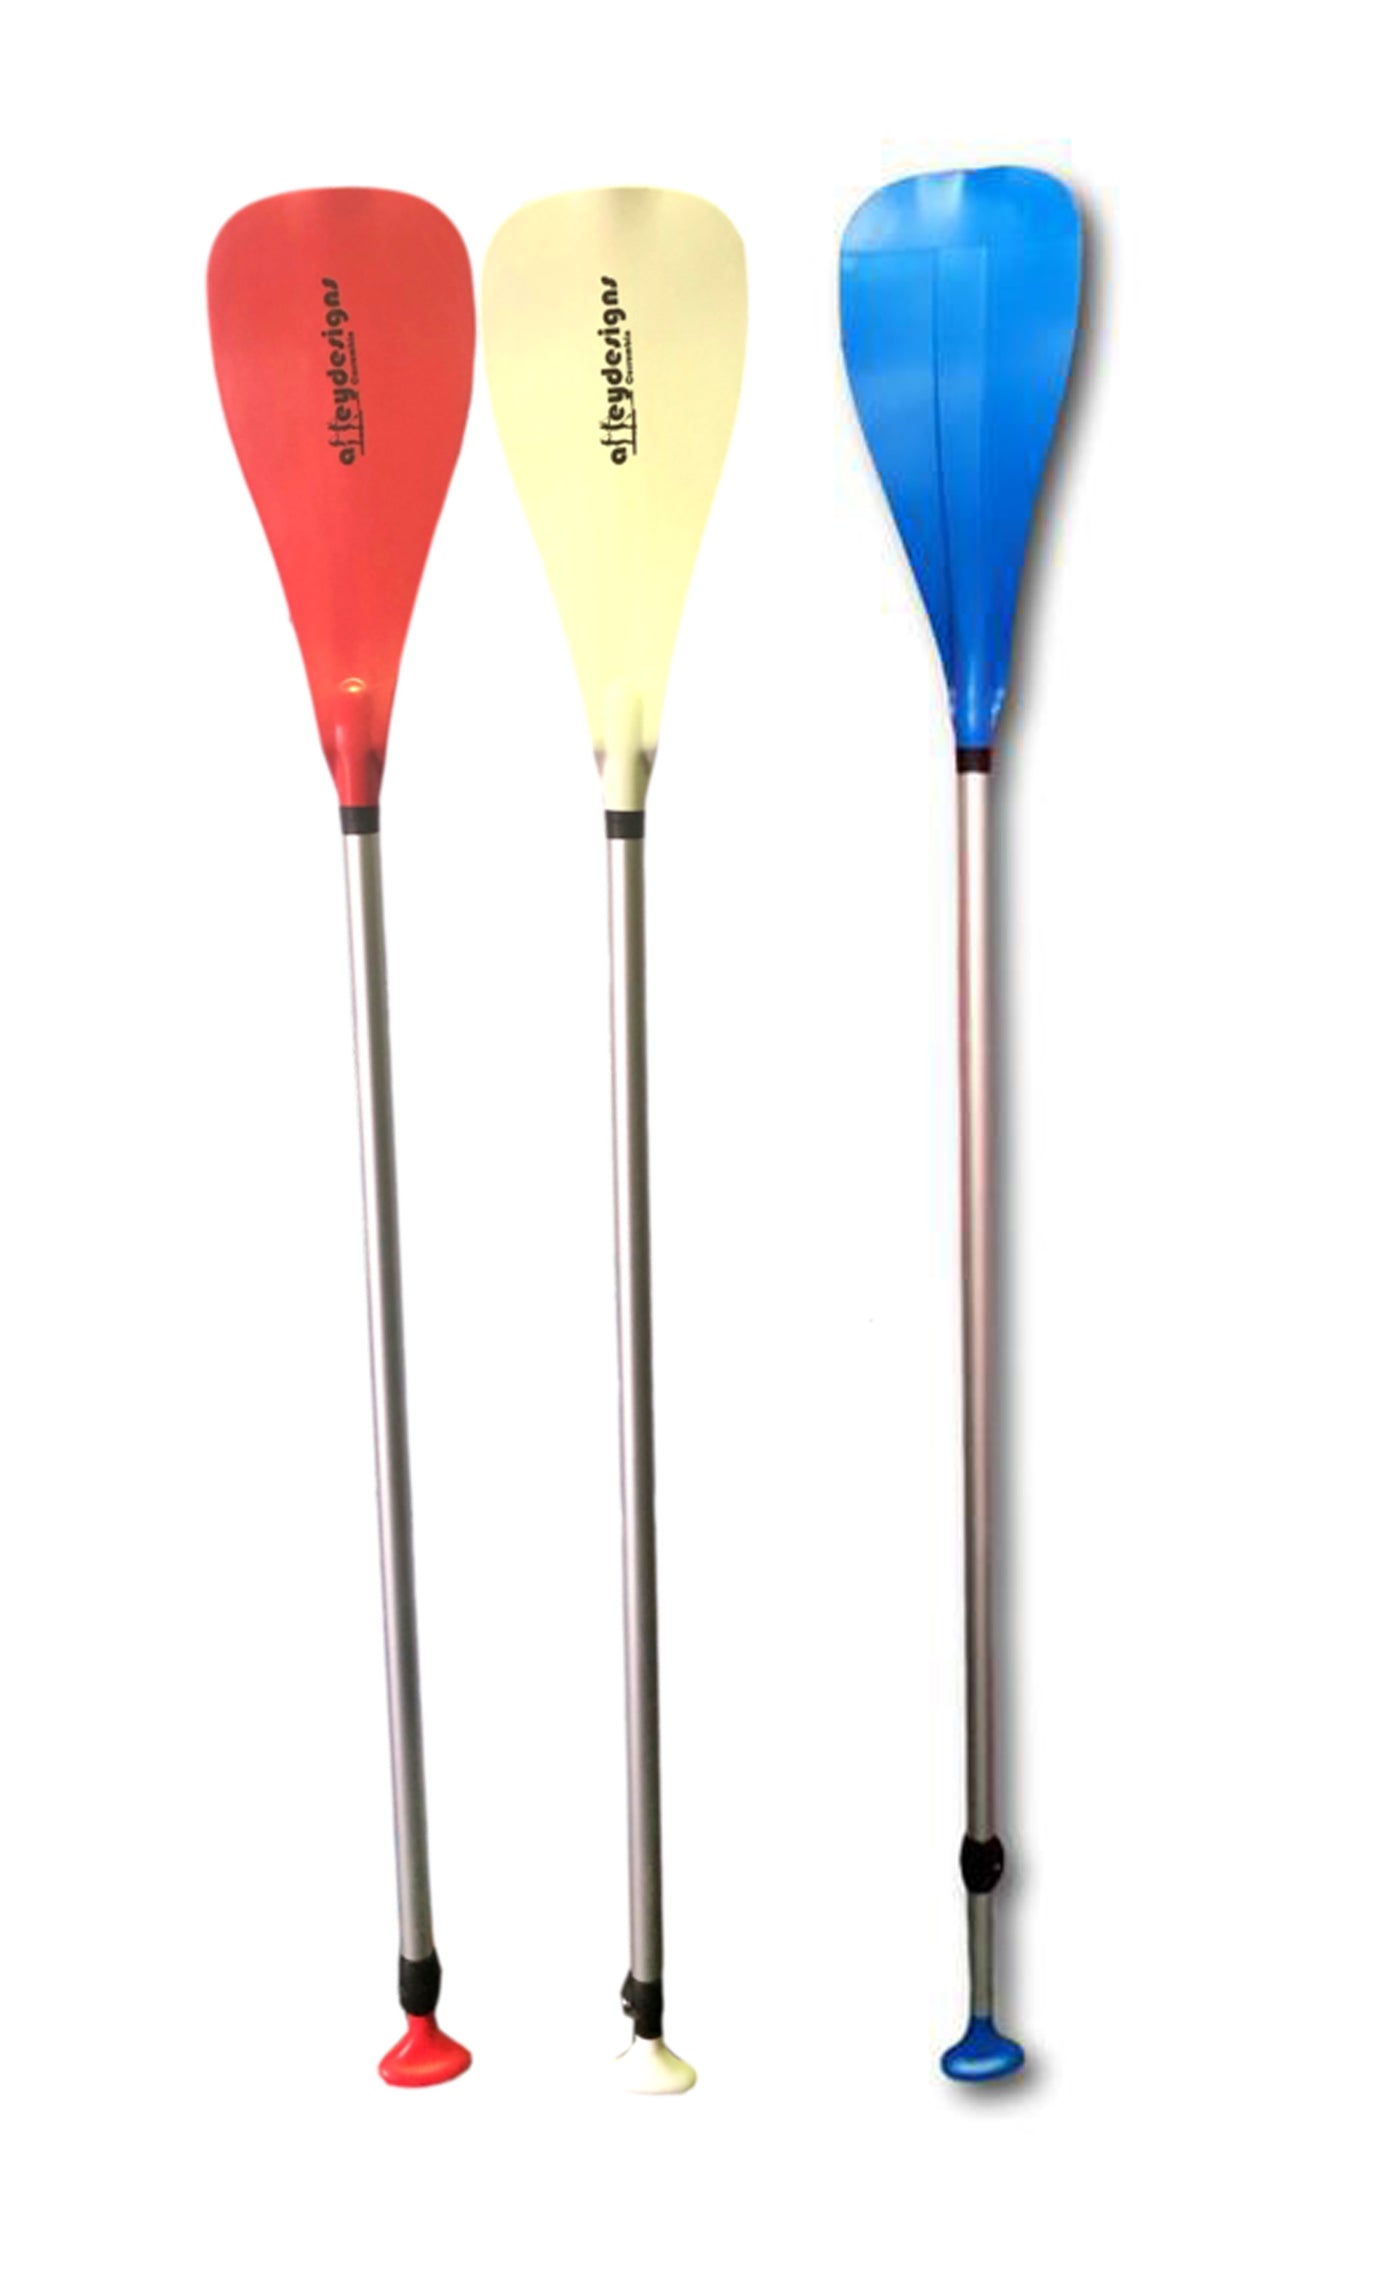 KIDS SUP PADDLE - Adjustable and light. RED OR WHITE OR BLUE - Alleydesigns  Pty Ltd                                             ABN: 44165571264